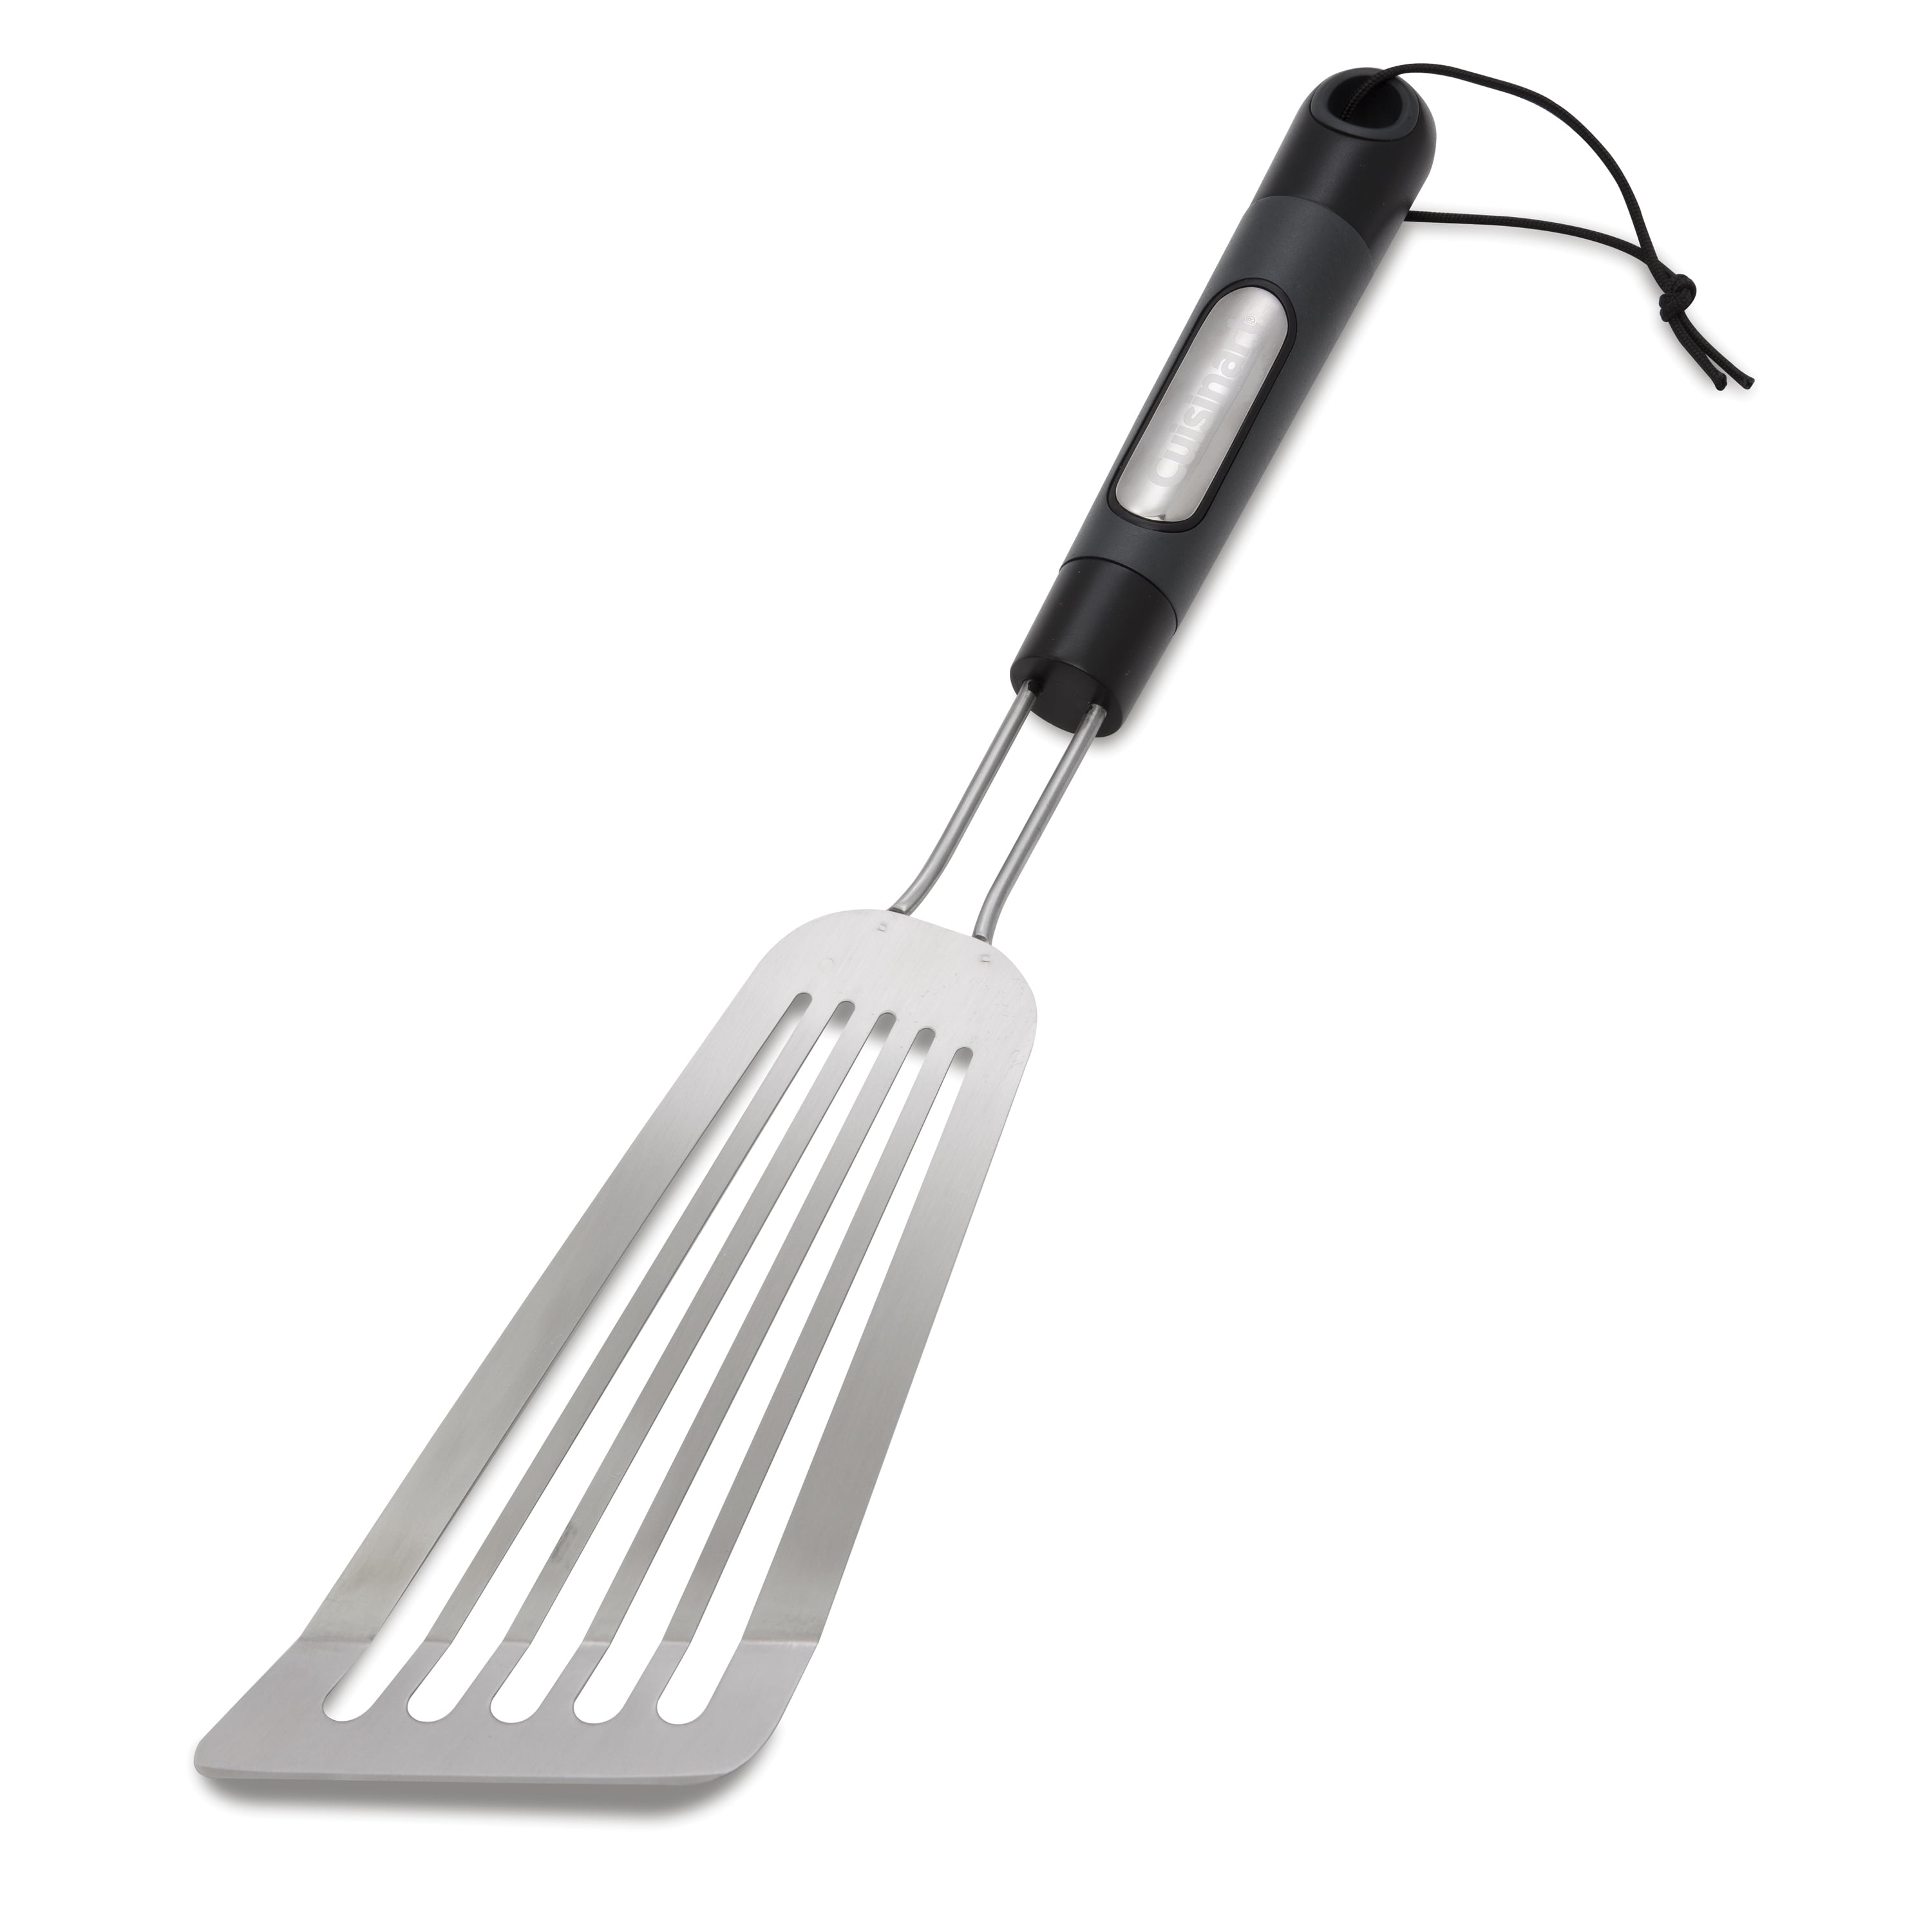 Deiss PRO Kitchen Grill Spatula Stainless Steel Heavy Duty Slotted Turner -  14.4 Metal Spatula for …See more Deiss PRO Kitchen Grill Spatula